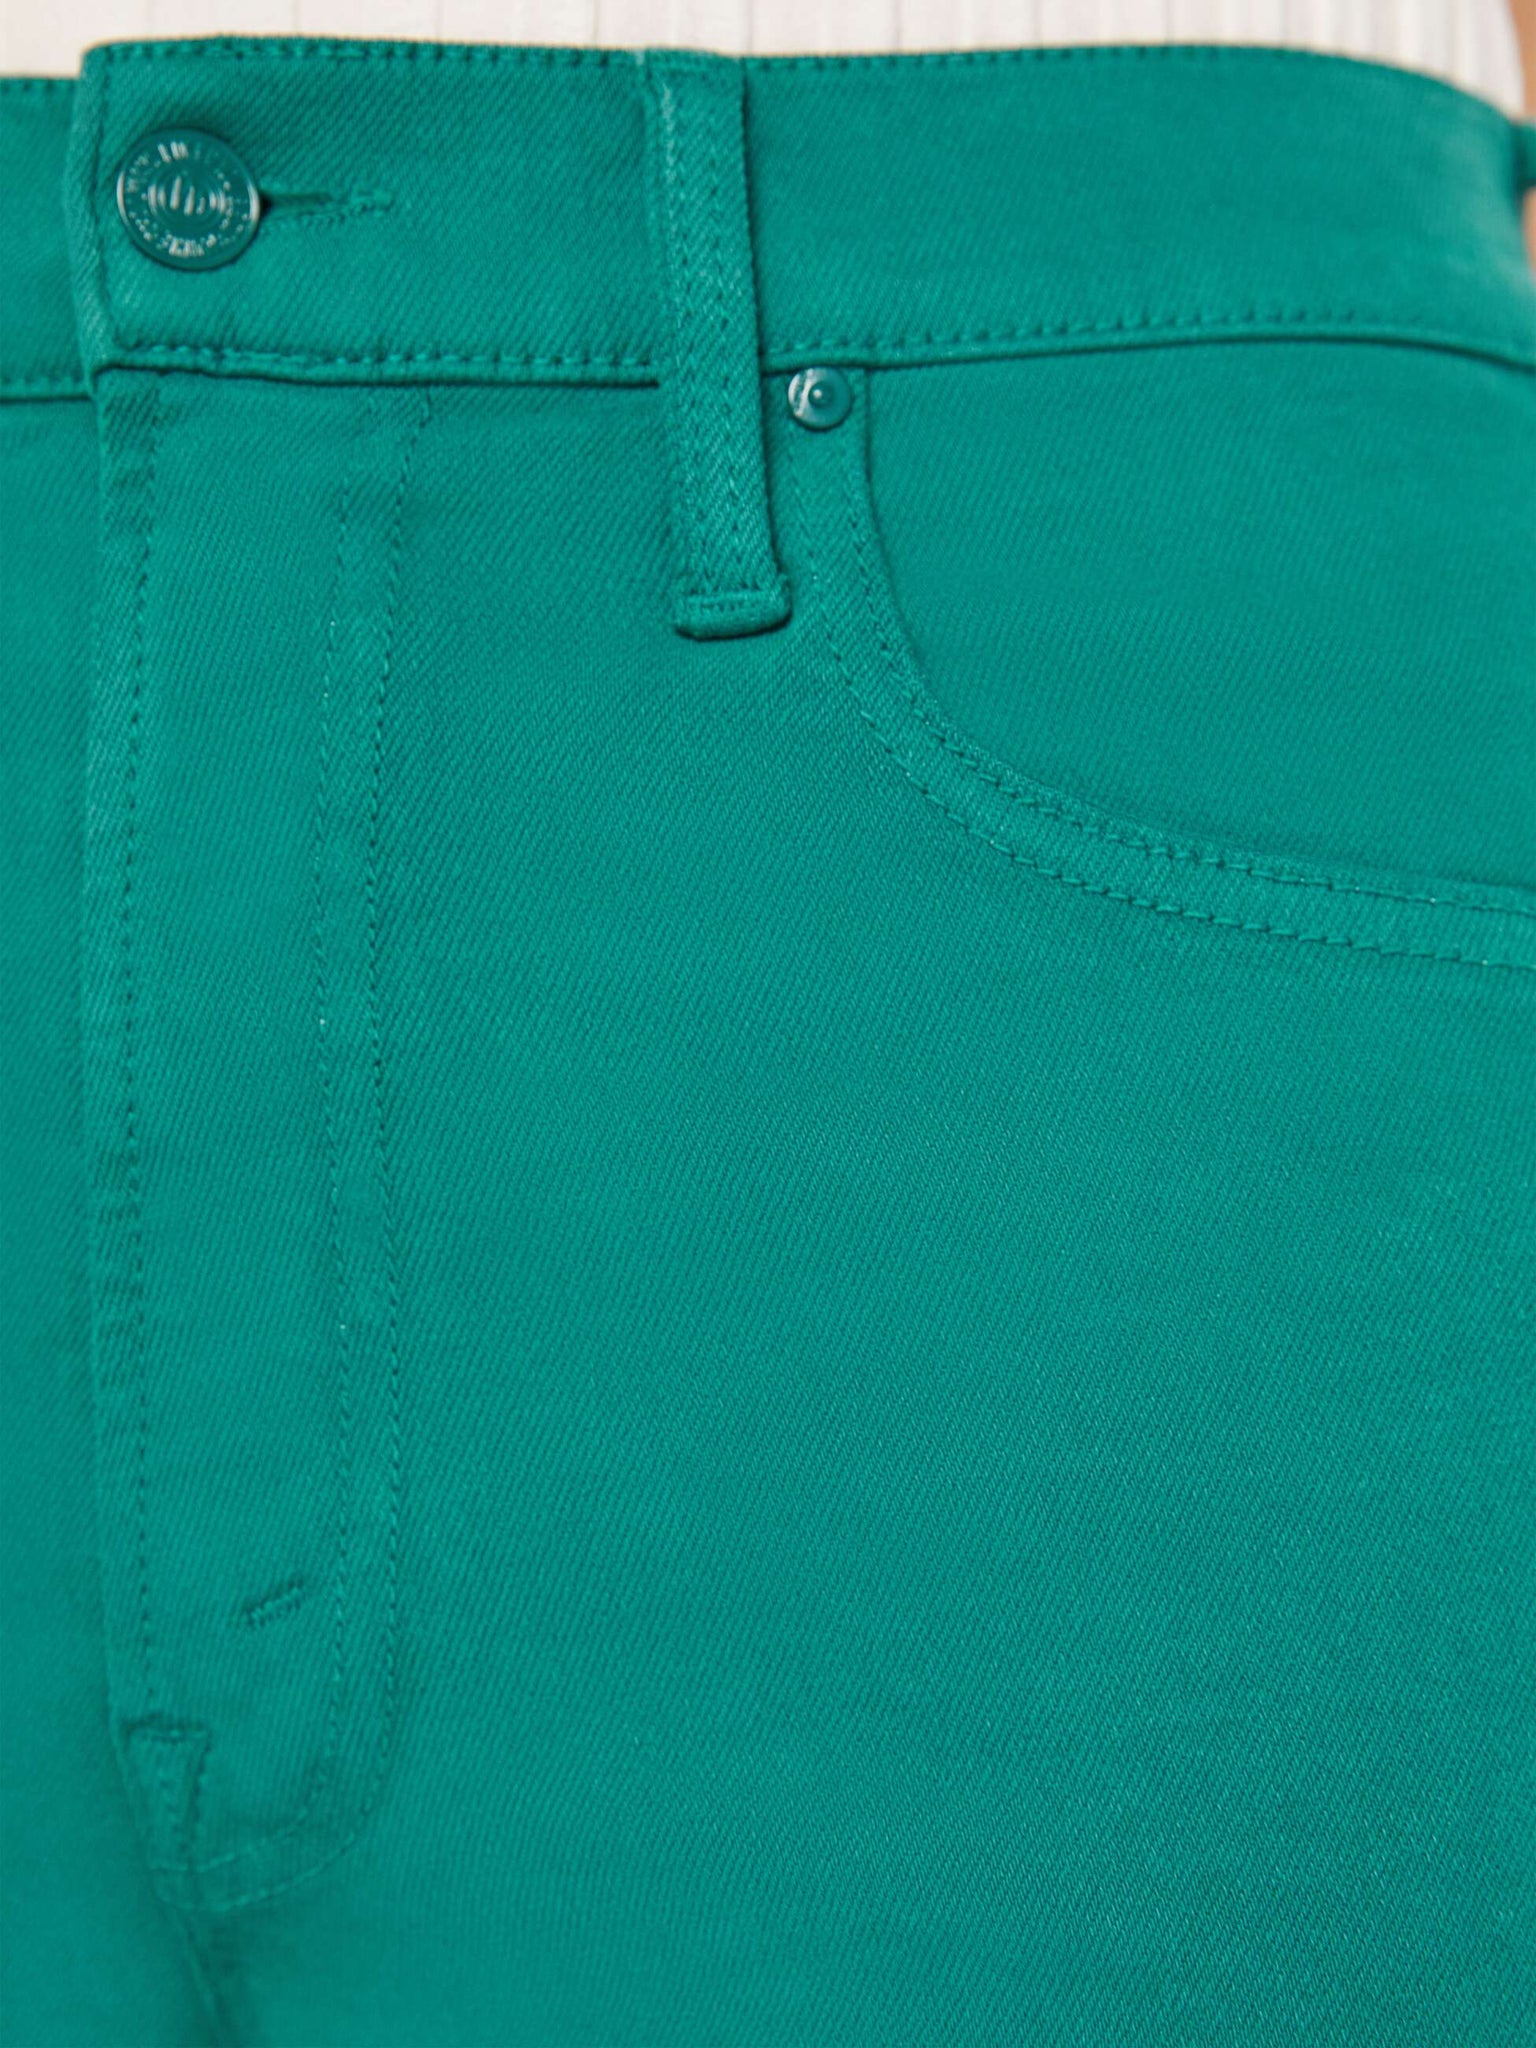 The Rambler Zip Ankle in Teal Green